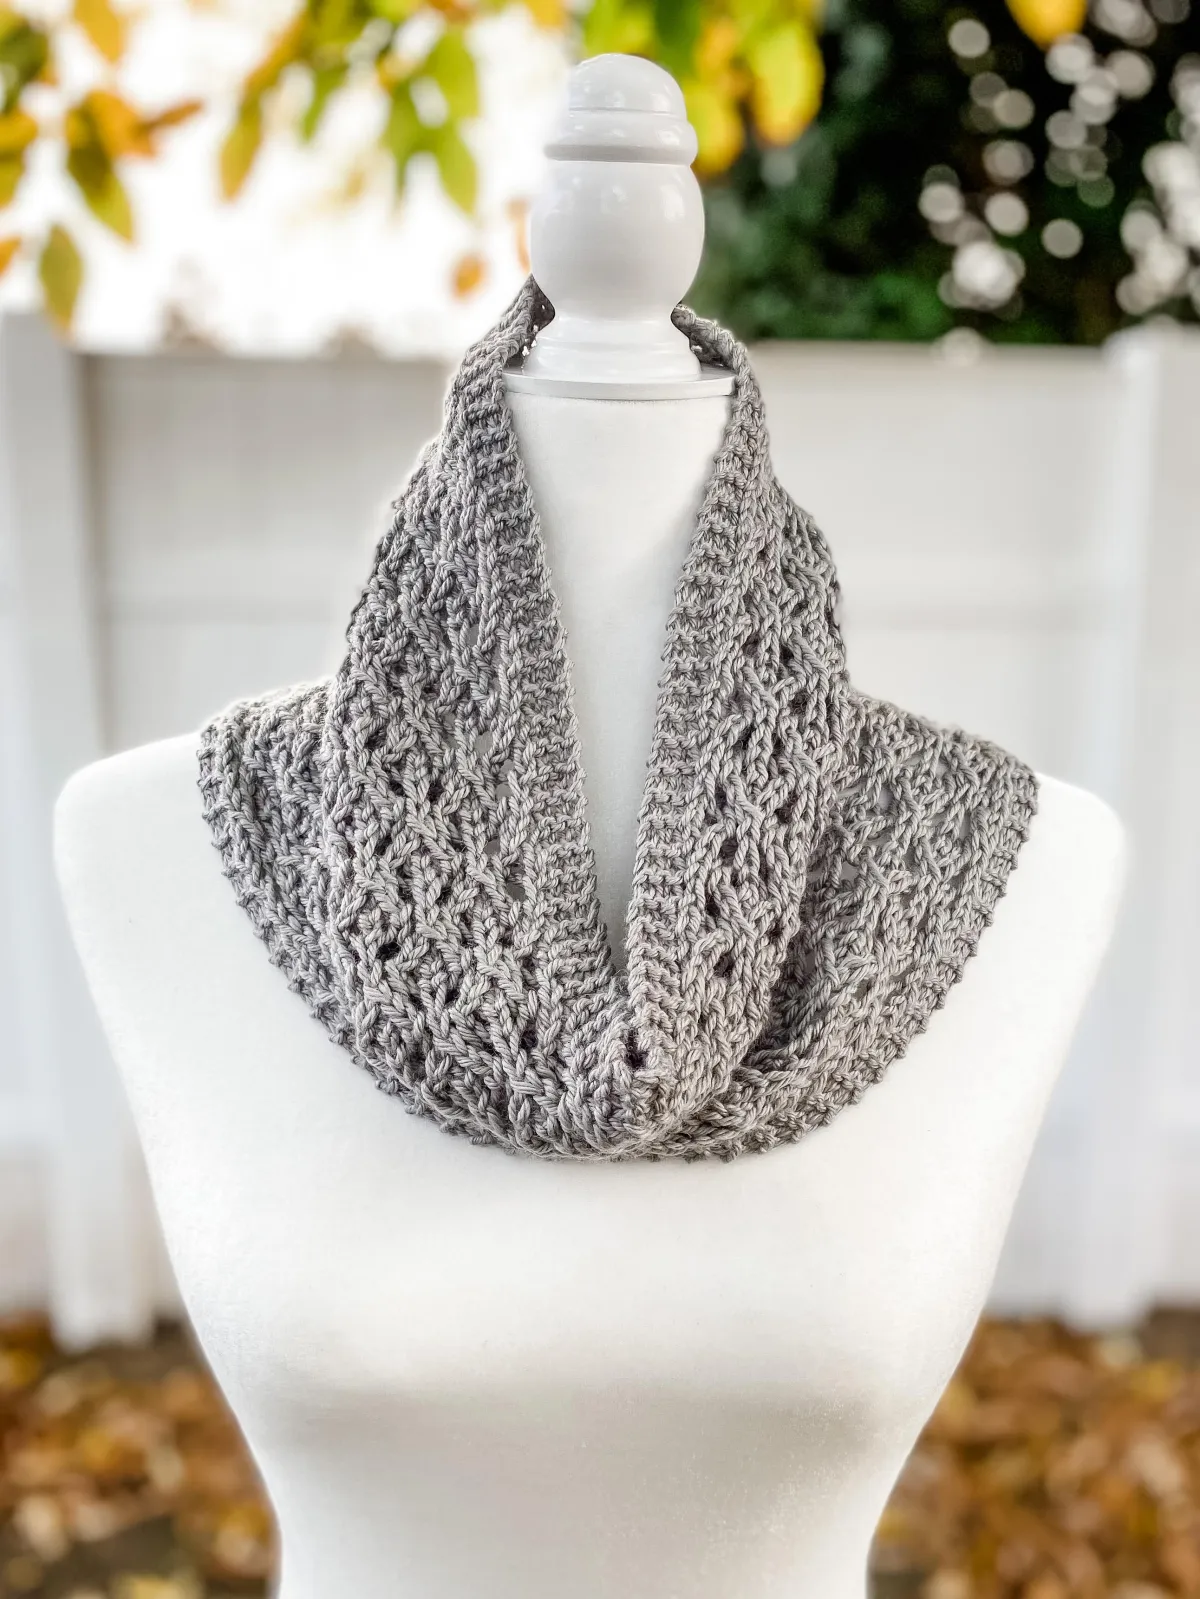 Tudor Lace Cowl Knitting Pattern by Jessica Ays